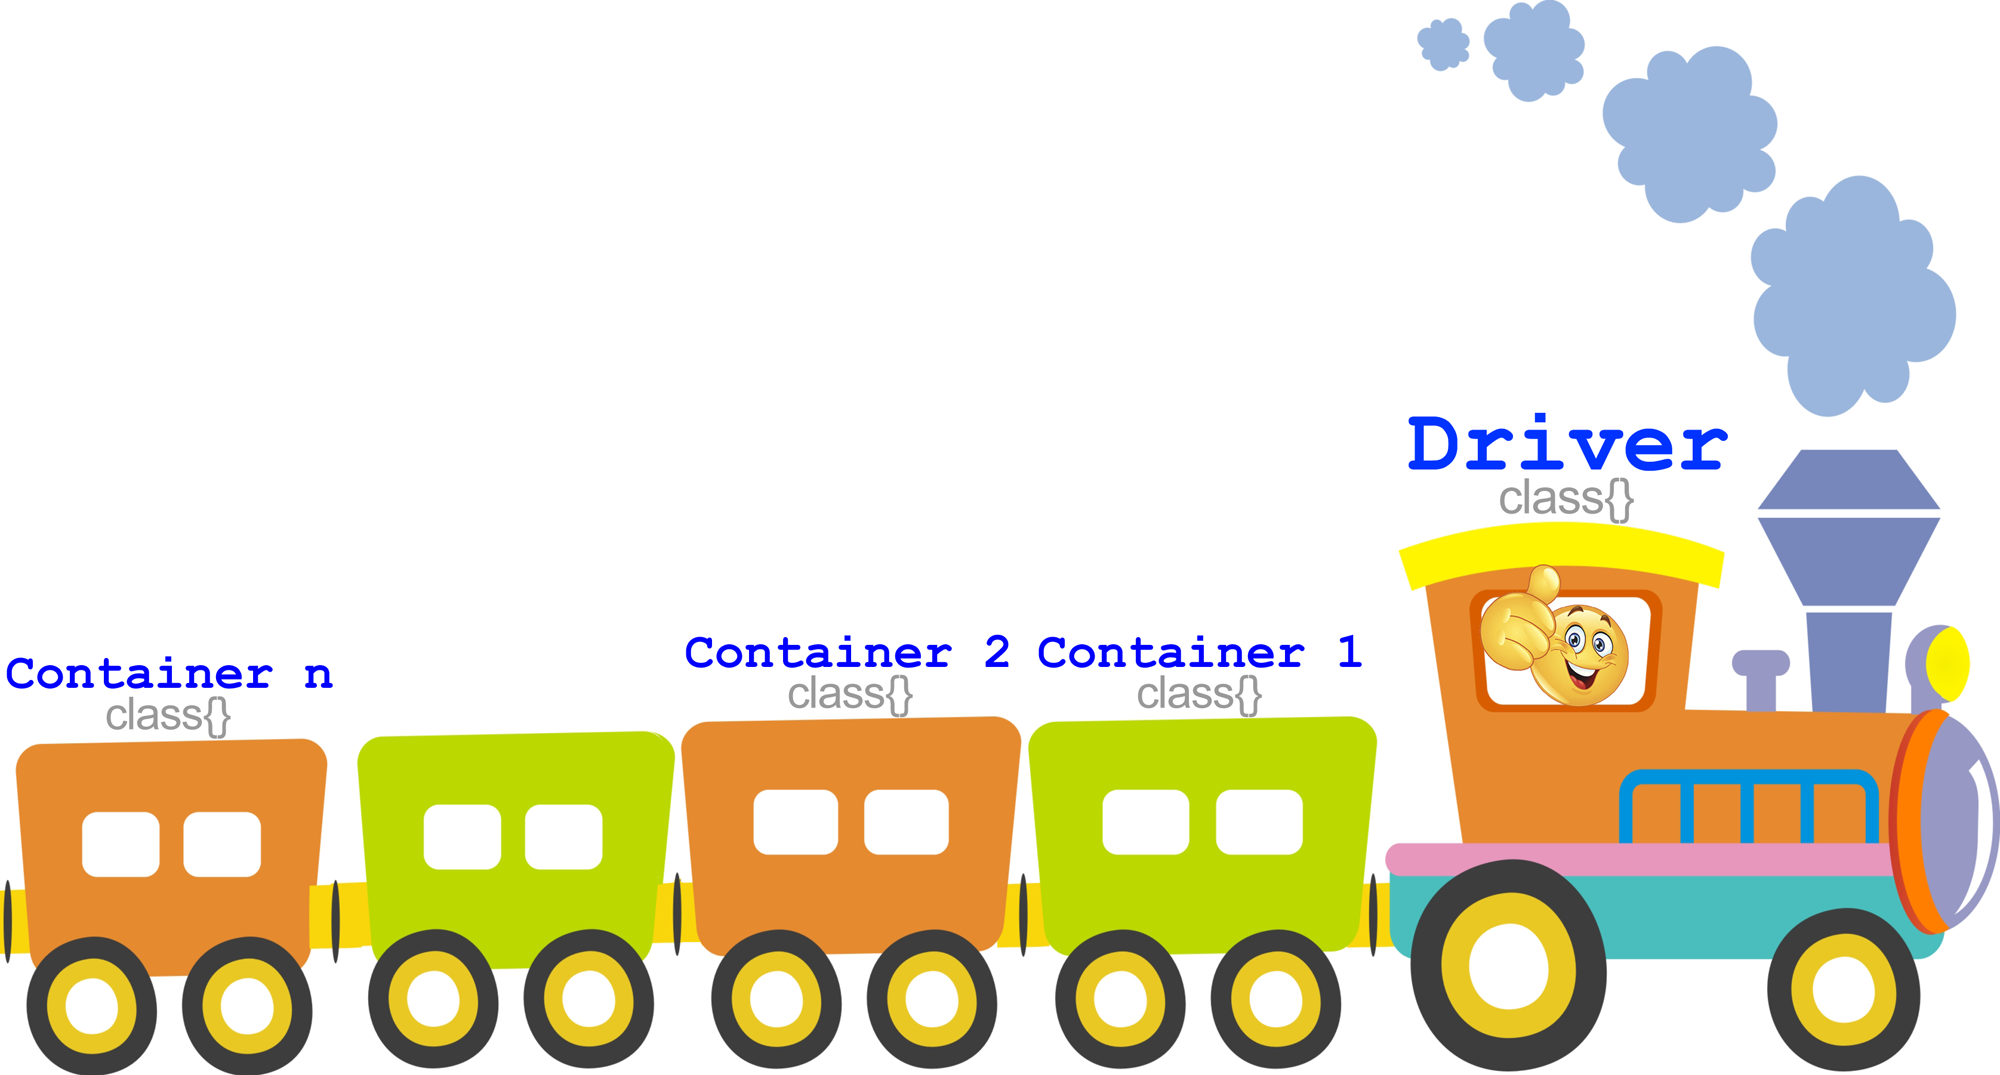 Driver and Container classes